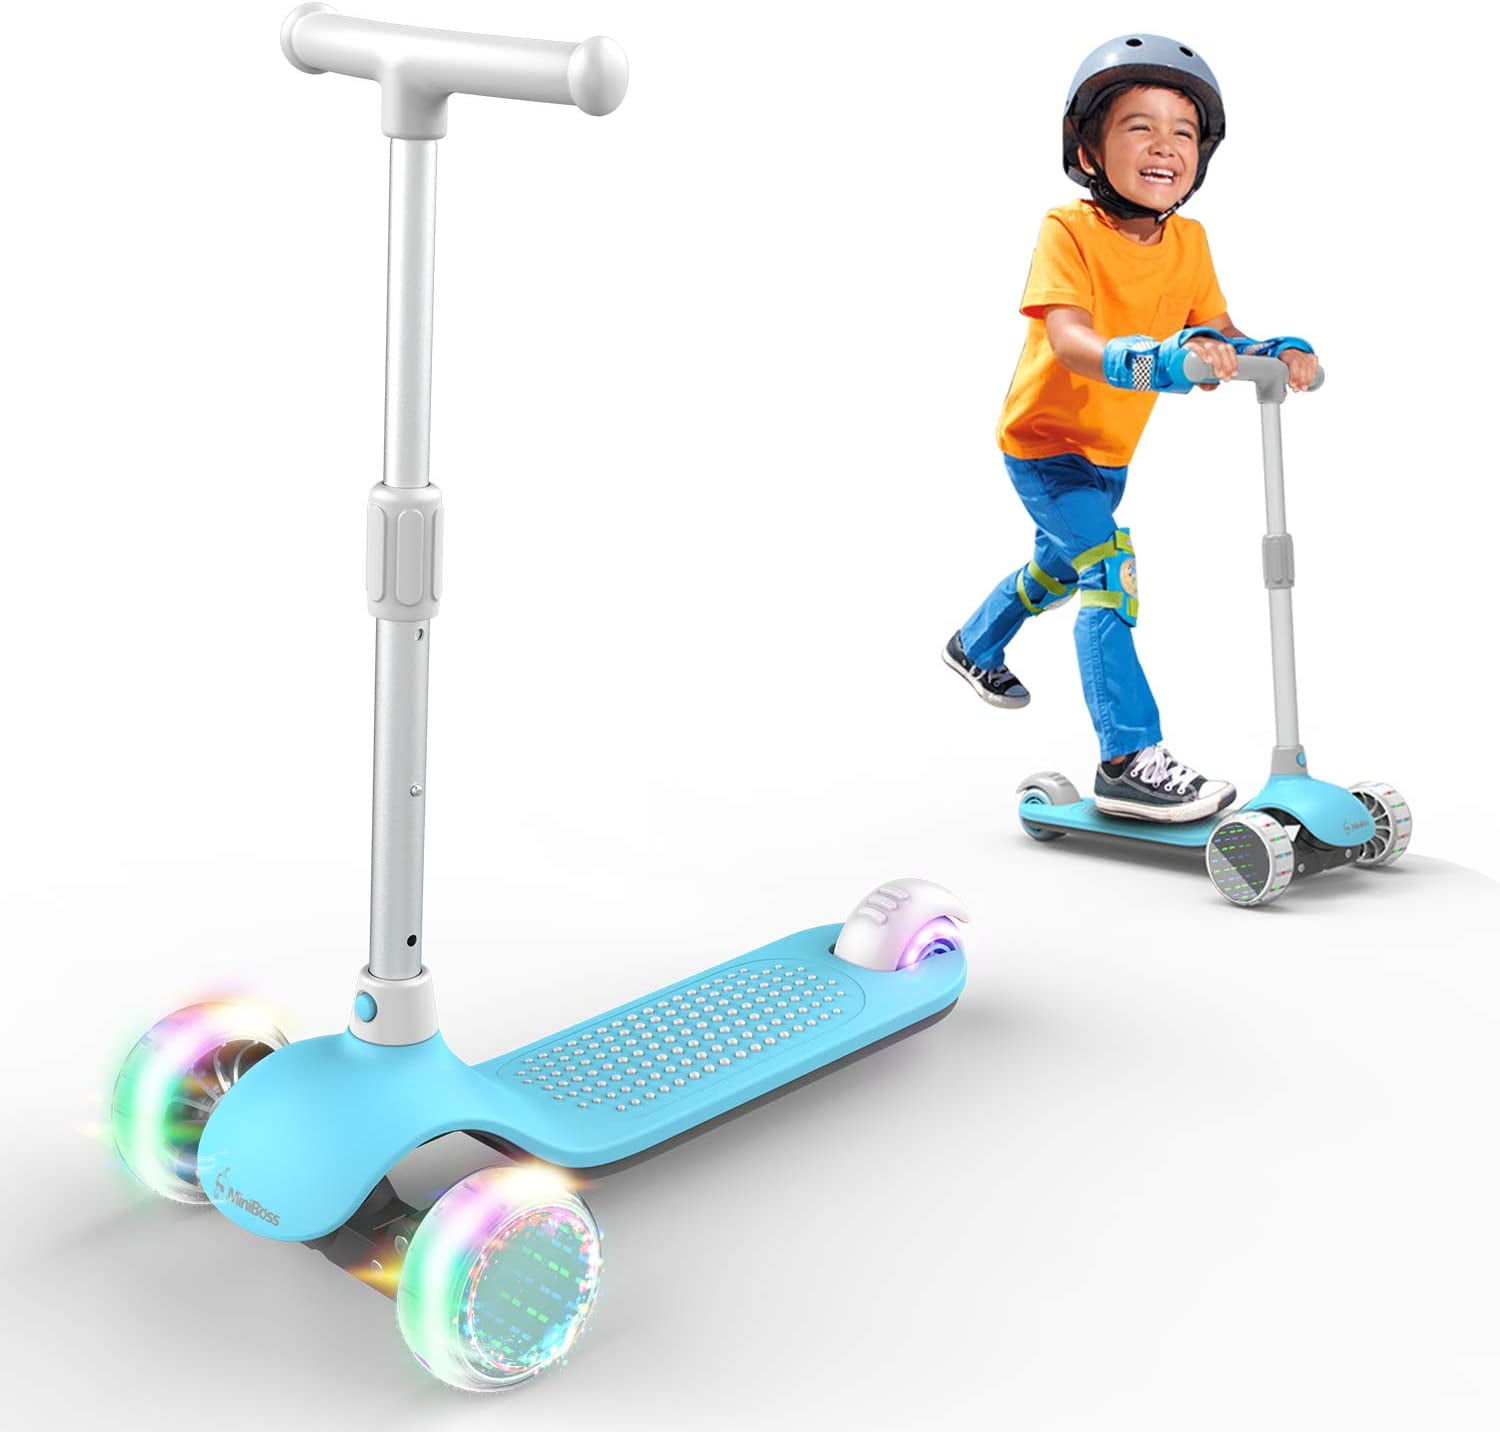 MiniBoss Kick Scooter for Kids, 3 Wheels Kid Scooter with Fashional Lights, Folding Kids Scooter, Flexible Scooter for Kids with Wide Deck & Adjustable Ergonomic Hand Bar, for 2 to 12 Years Kids-Blue